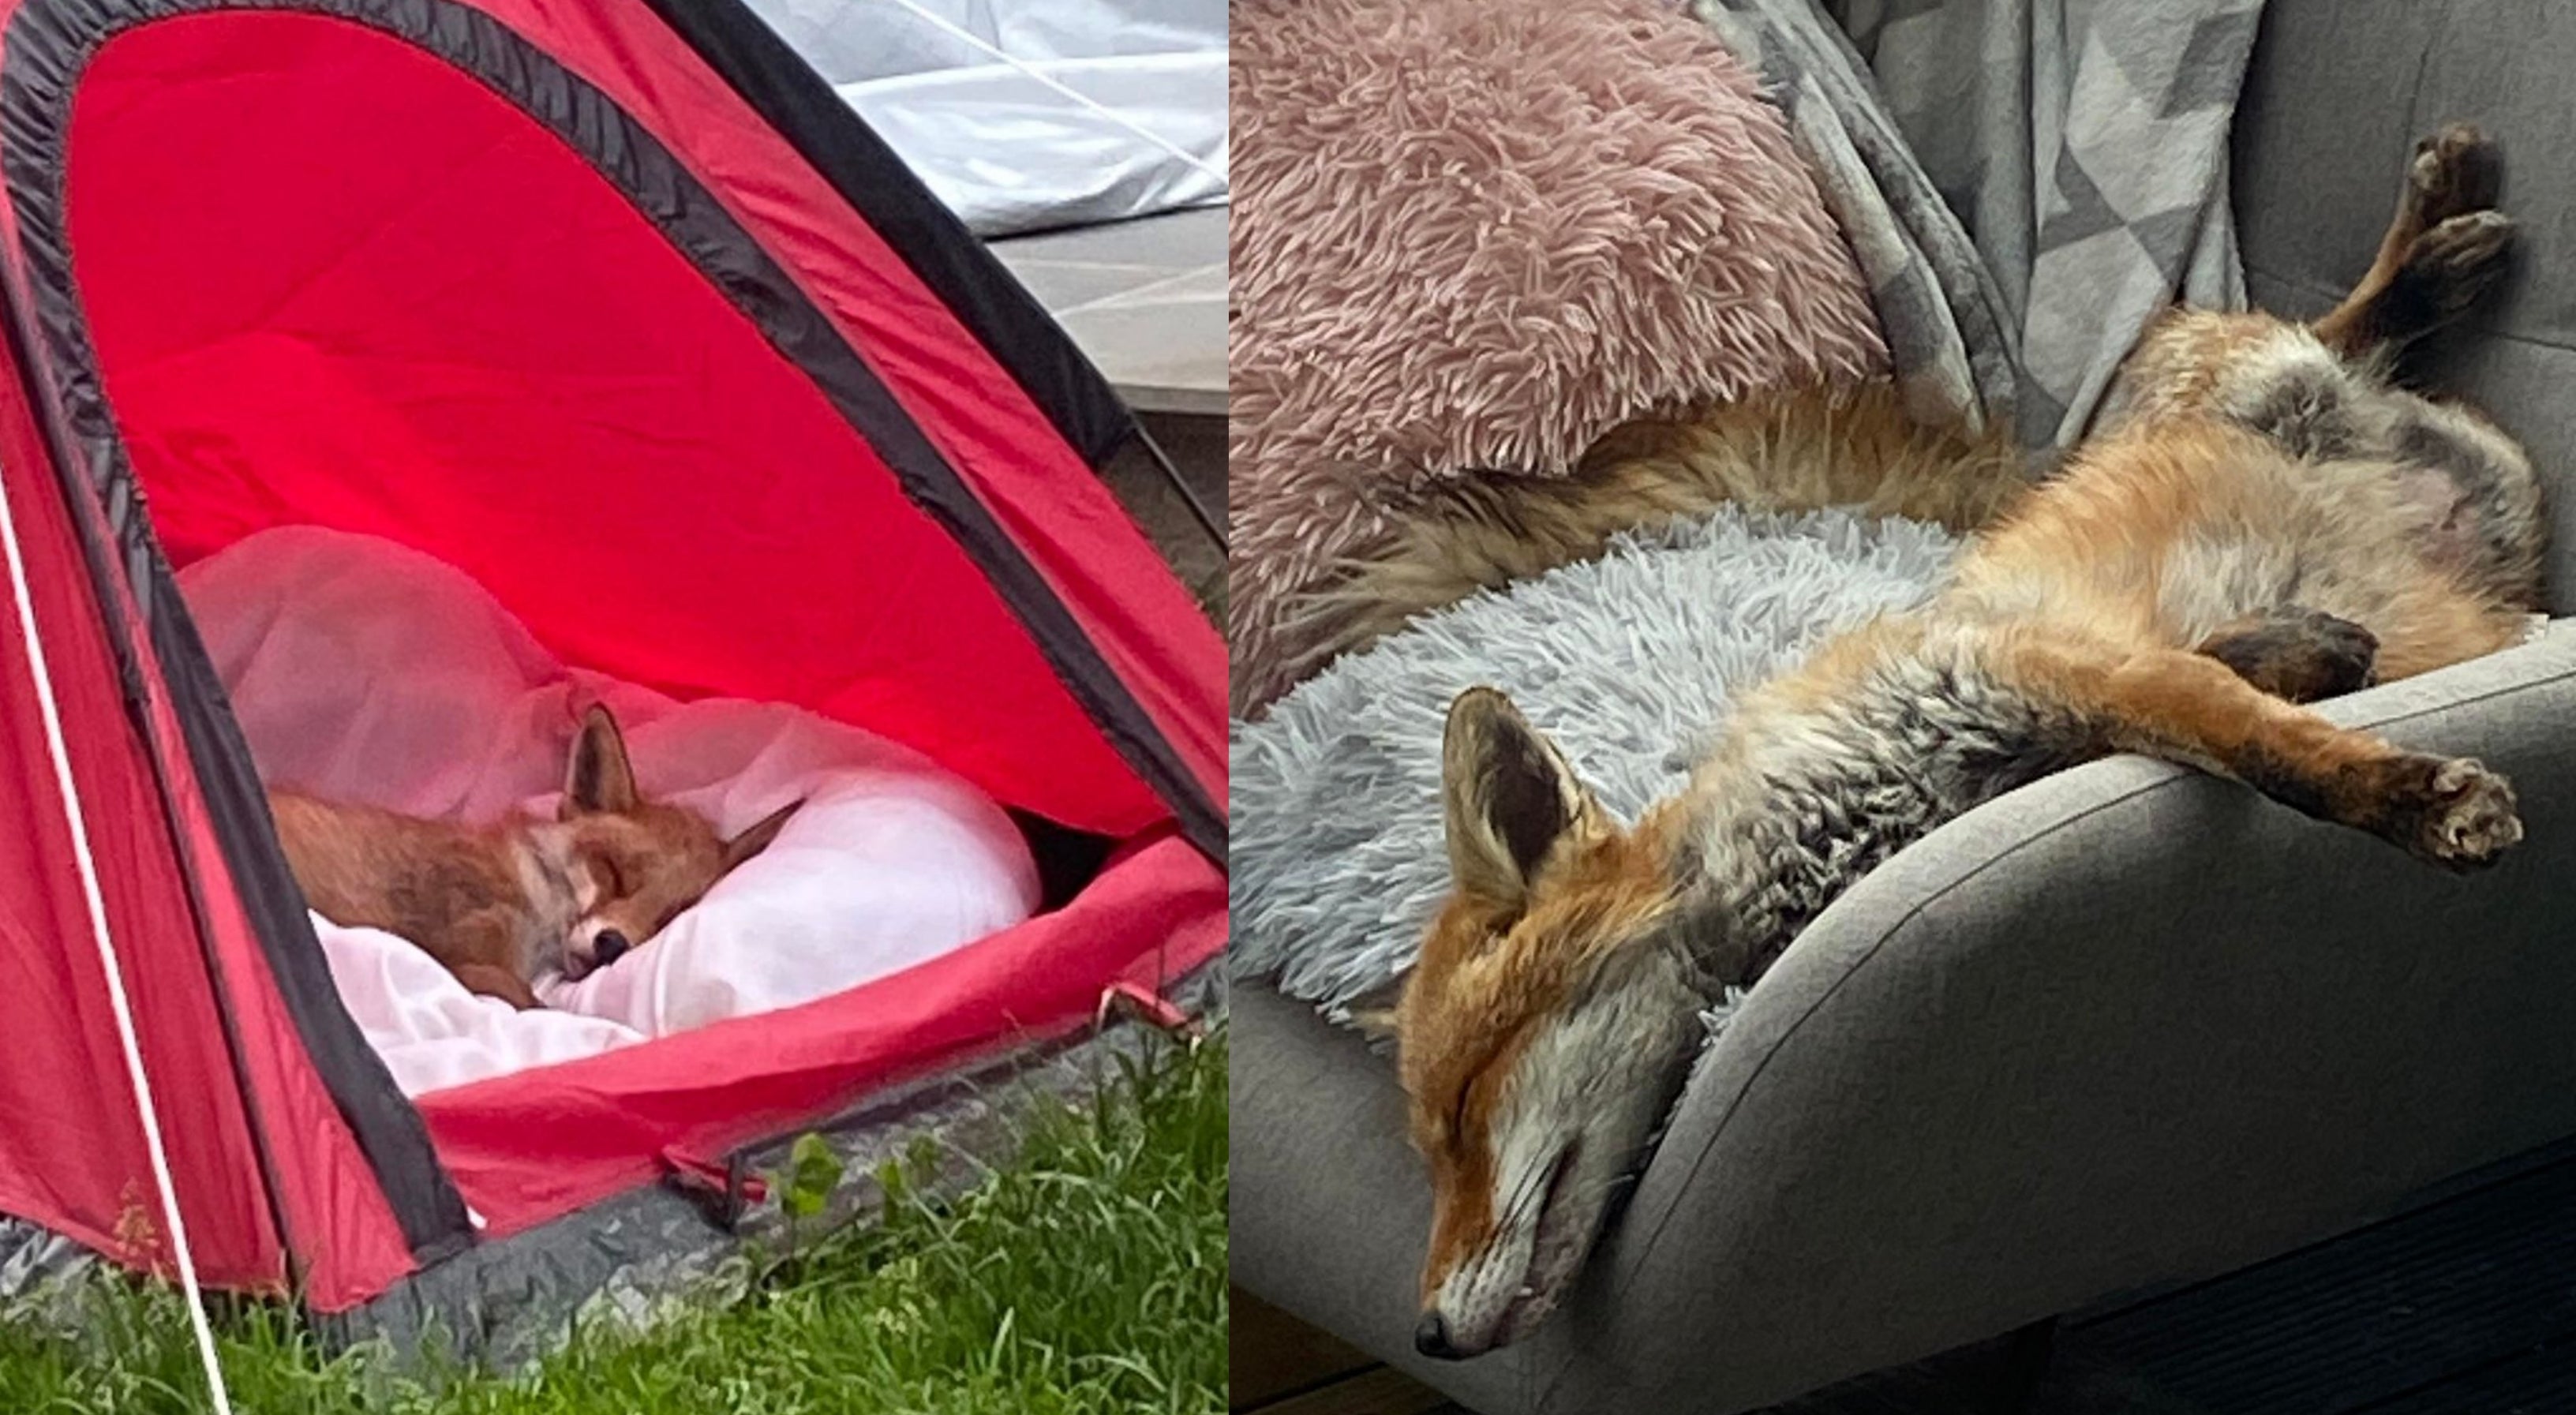 The family bought a tent for the injured fox to sleep in. (Elizabeth Wink/PA)